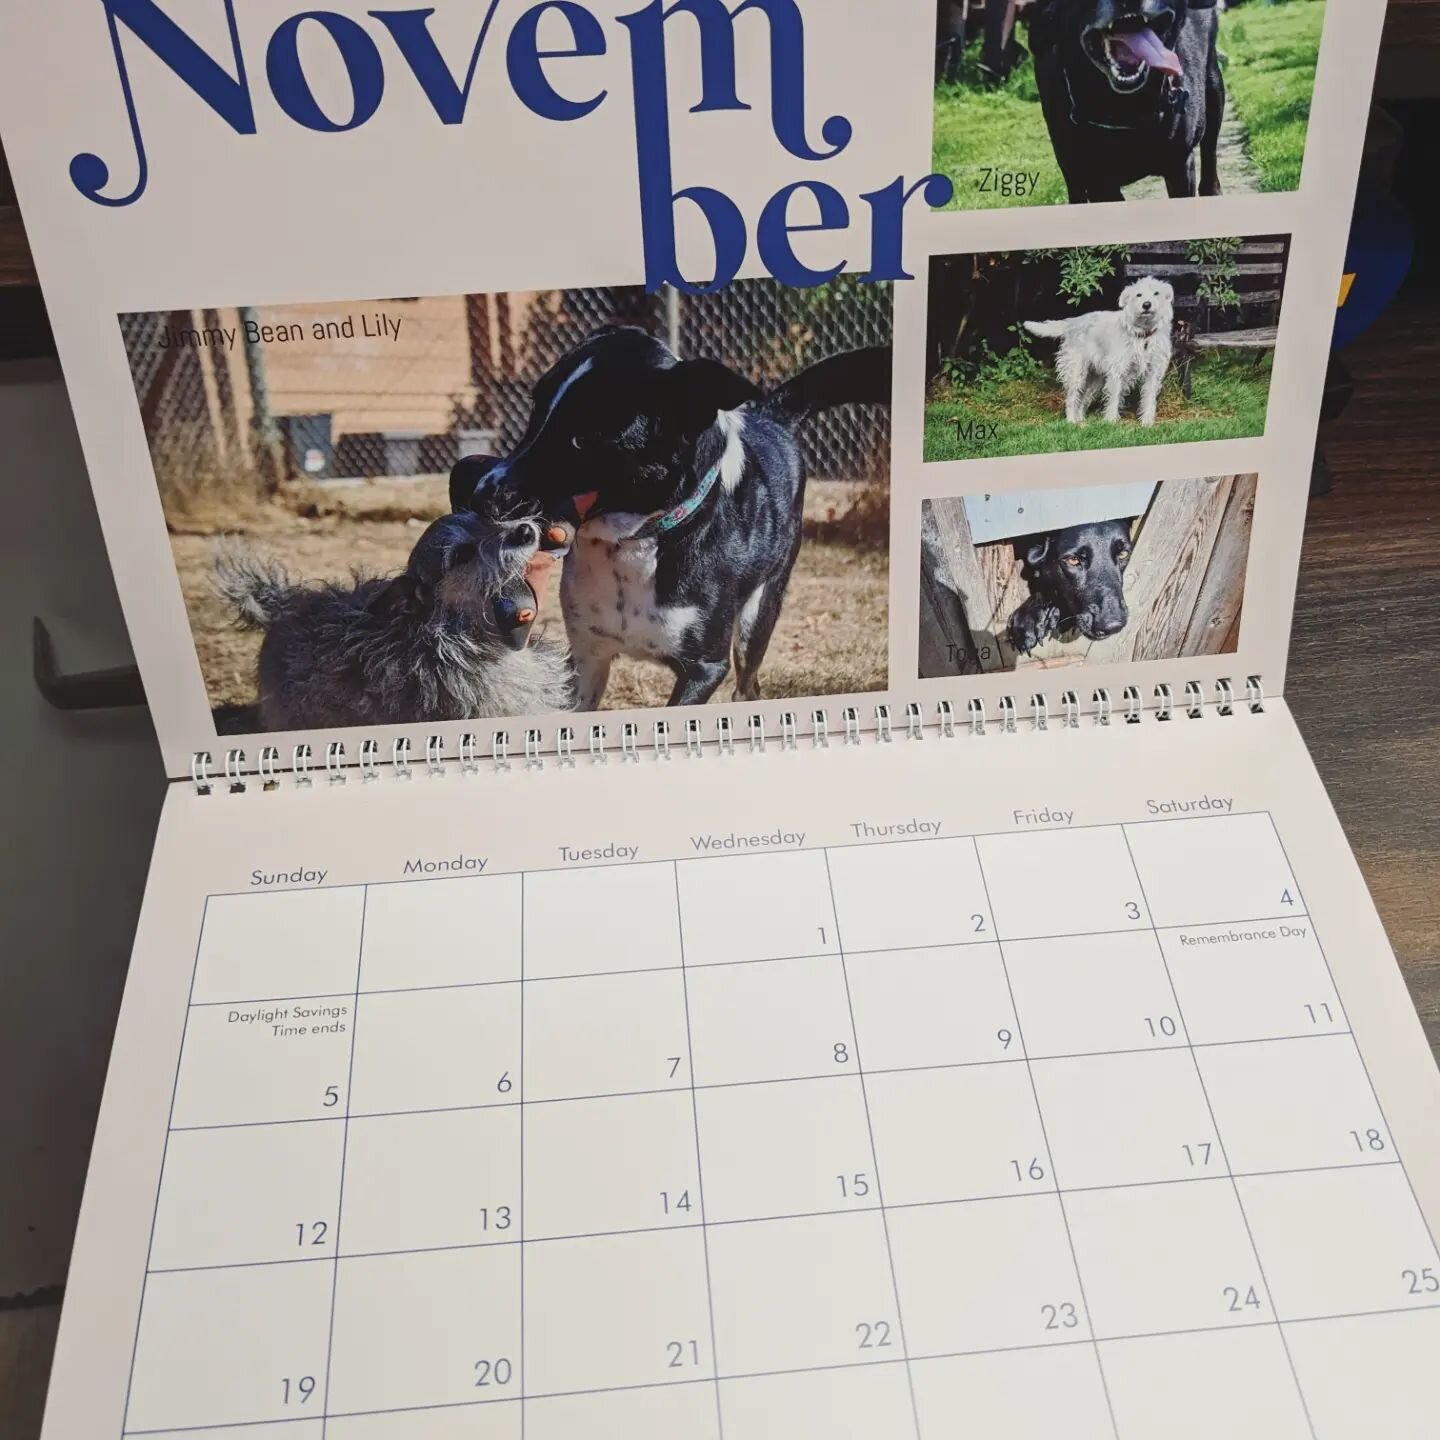 We have calenders! They are priced at $25 total ($23.81 before tax) and feature many of our clients' pups! Available in store and at a limited quantity! 

#parksville #animalmagic #petresort #doggydaycare #boarding #kennel #dog #dogs #dogsoninstagram